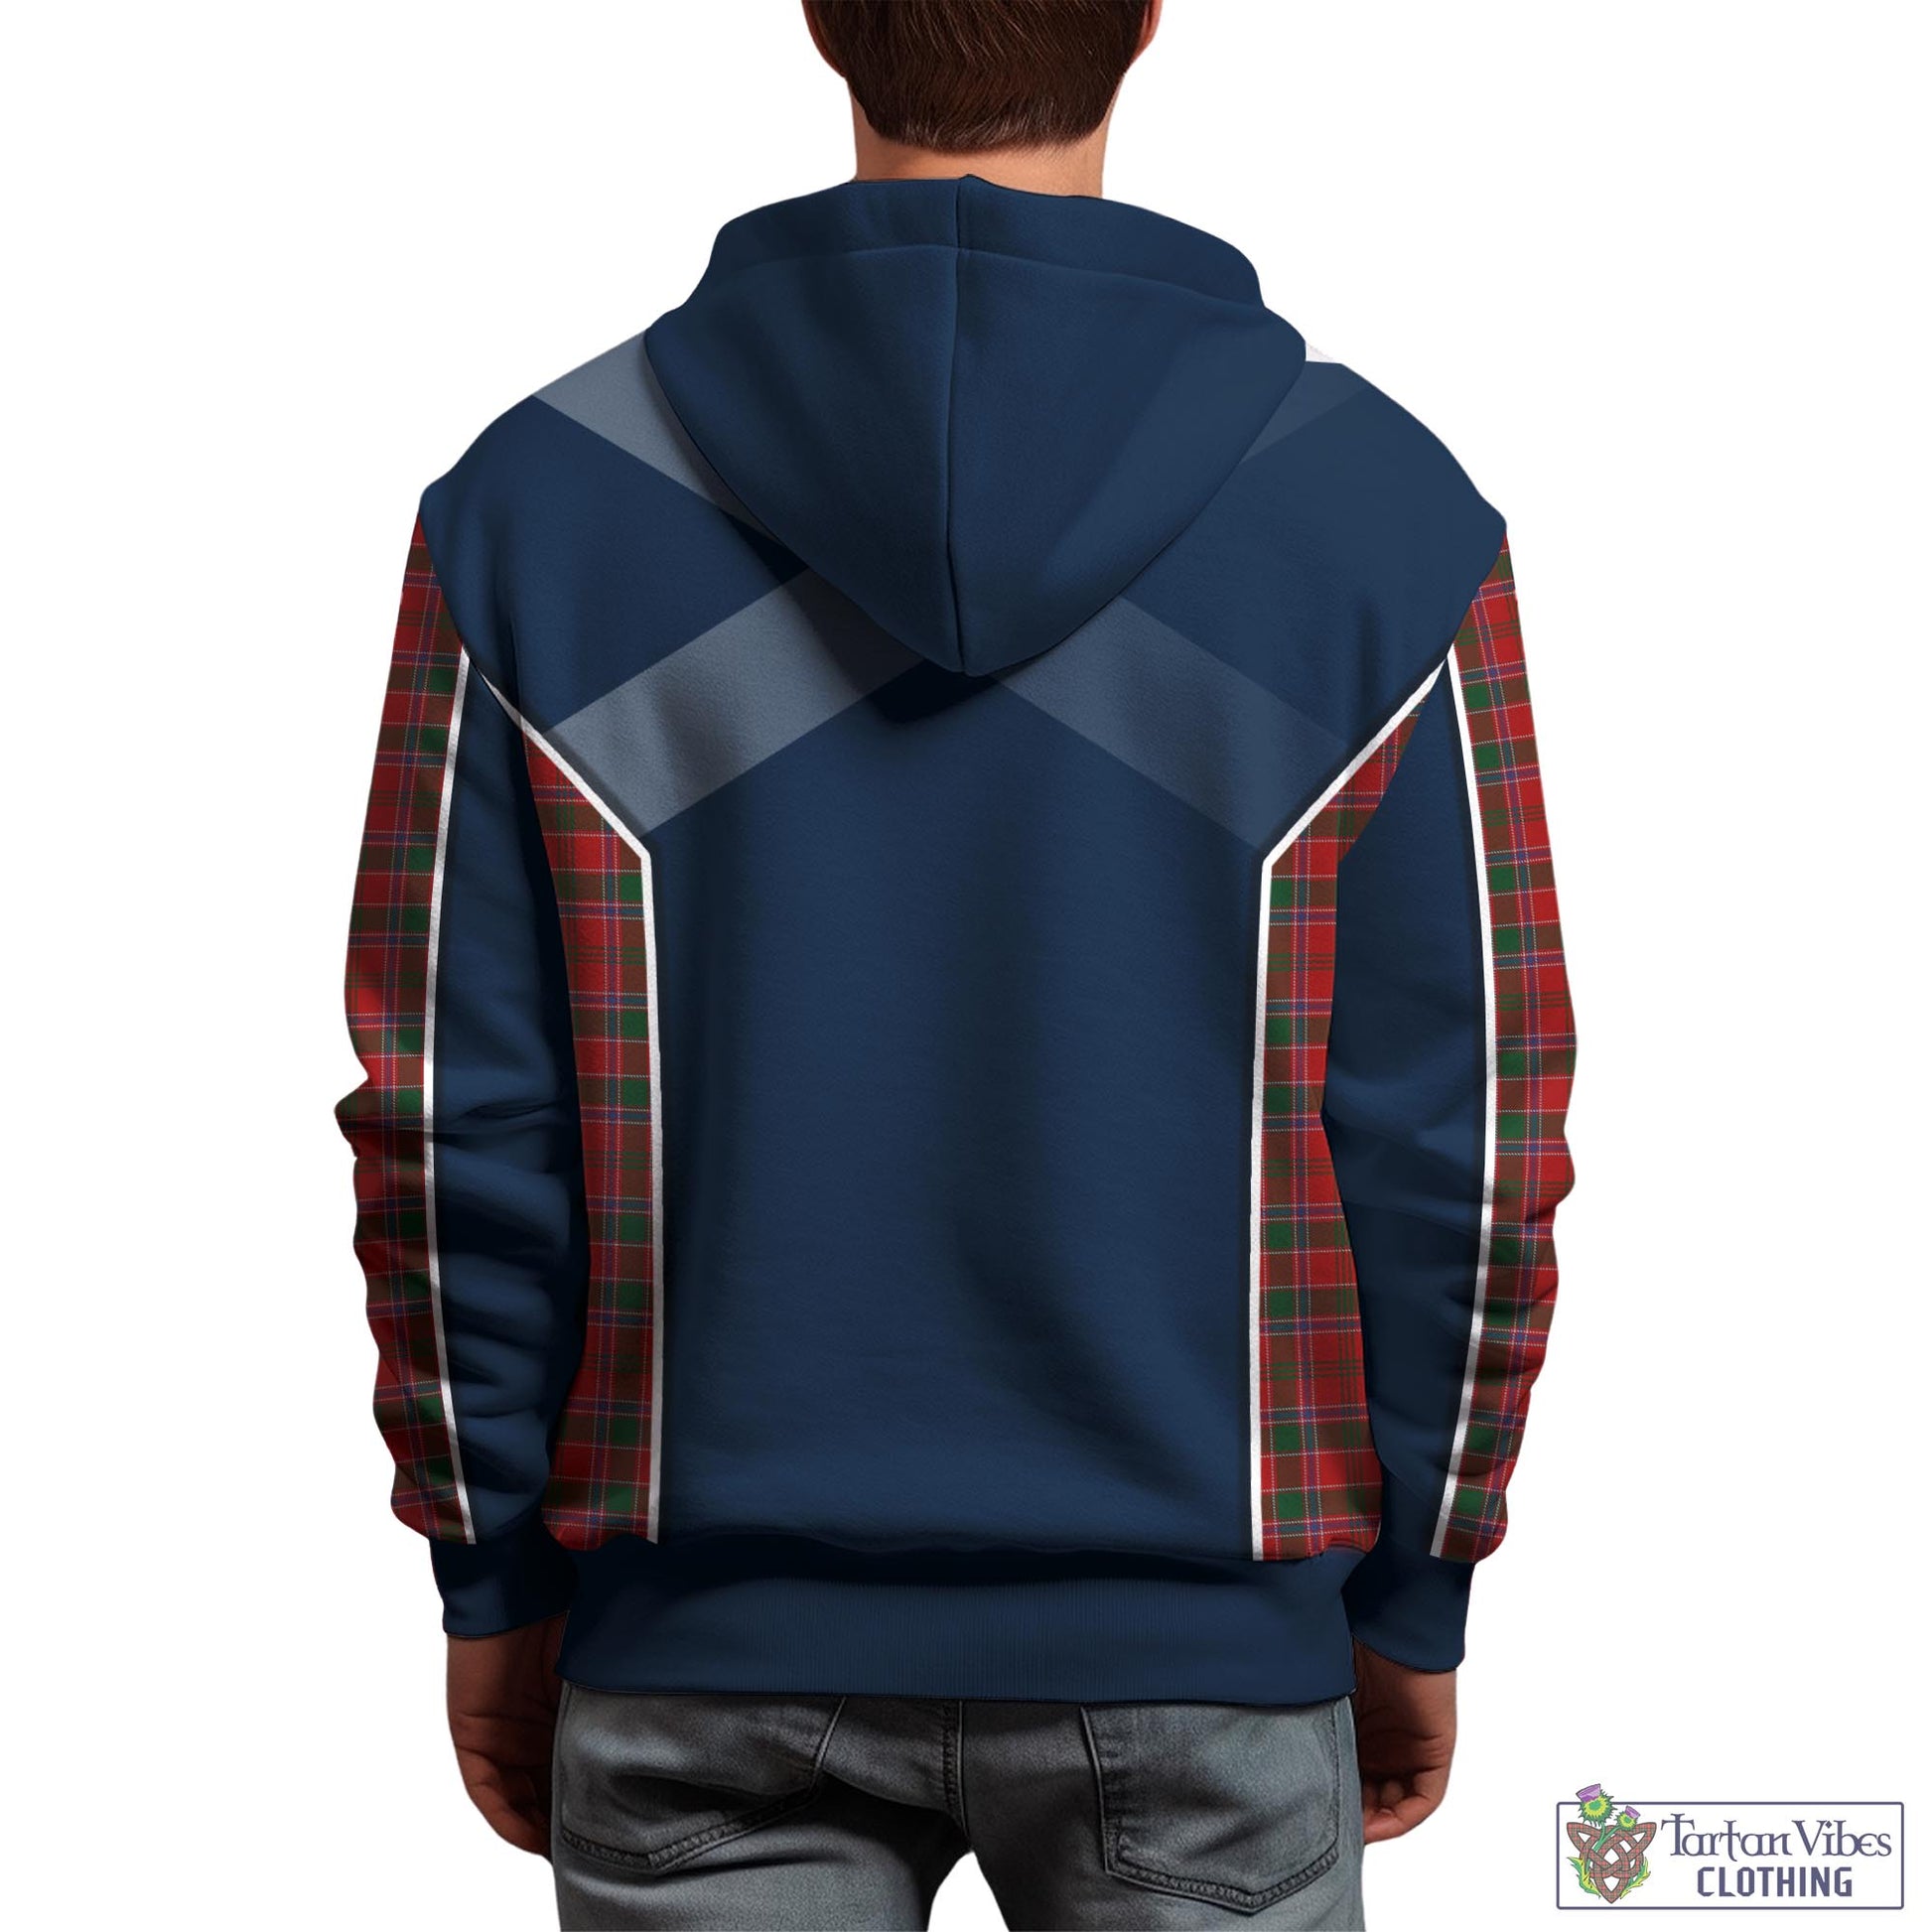 Tartan Vibes Clothing Dalzell (Dalziel) Tartan Hoodie with Family Crest and Scottish Thistle Vibes Sport Style